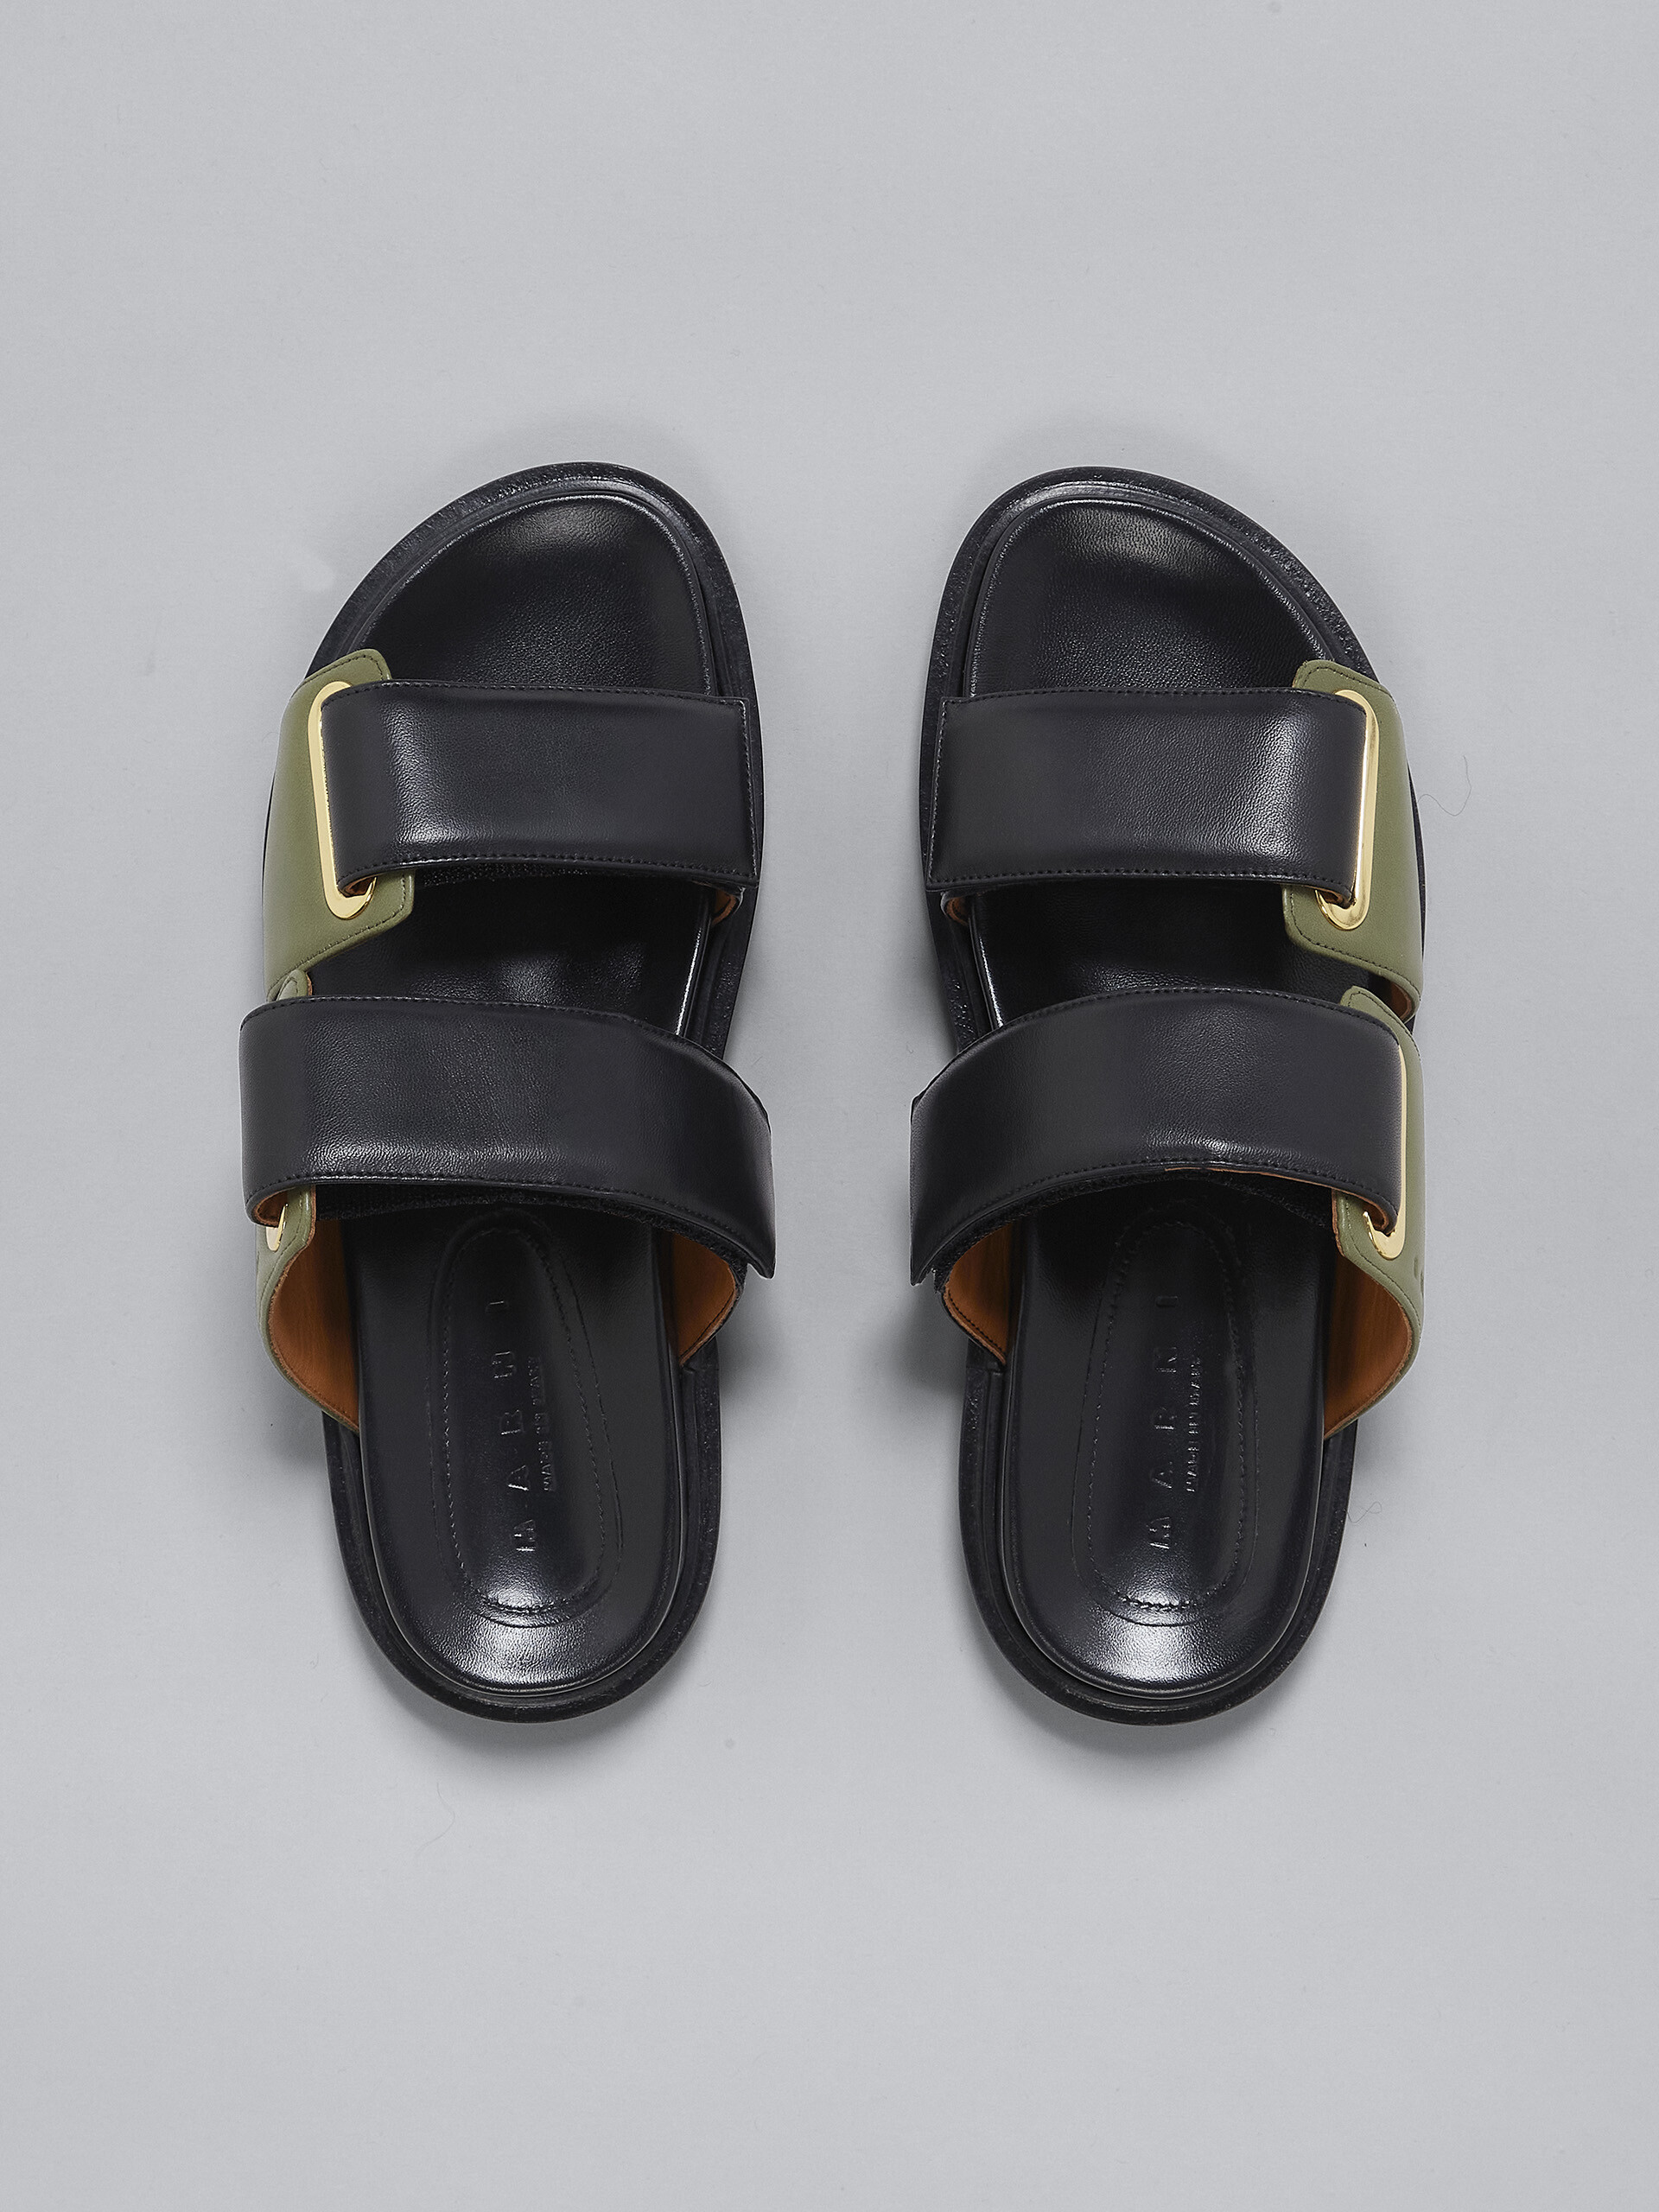 Black and green leather fussbett - Sandals - Image 4